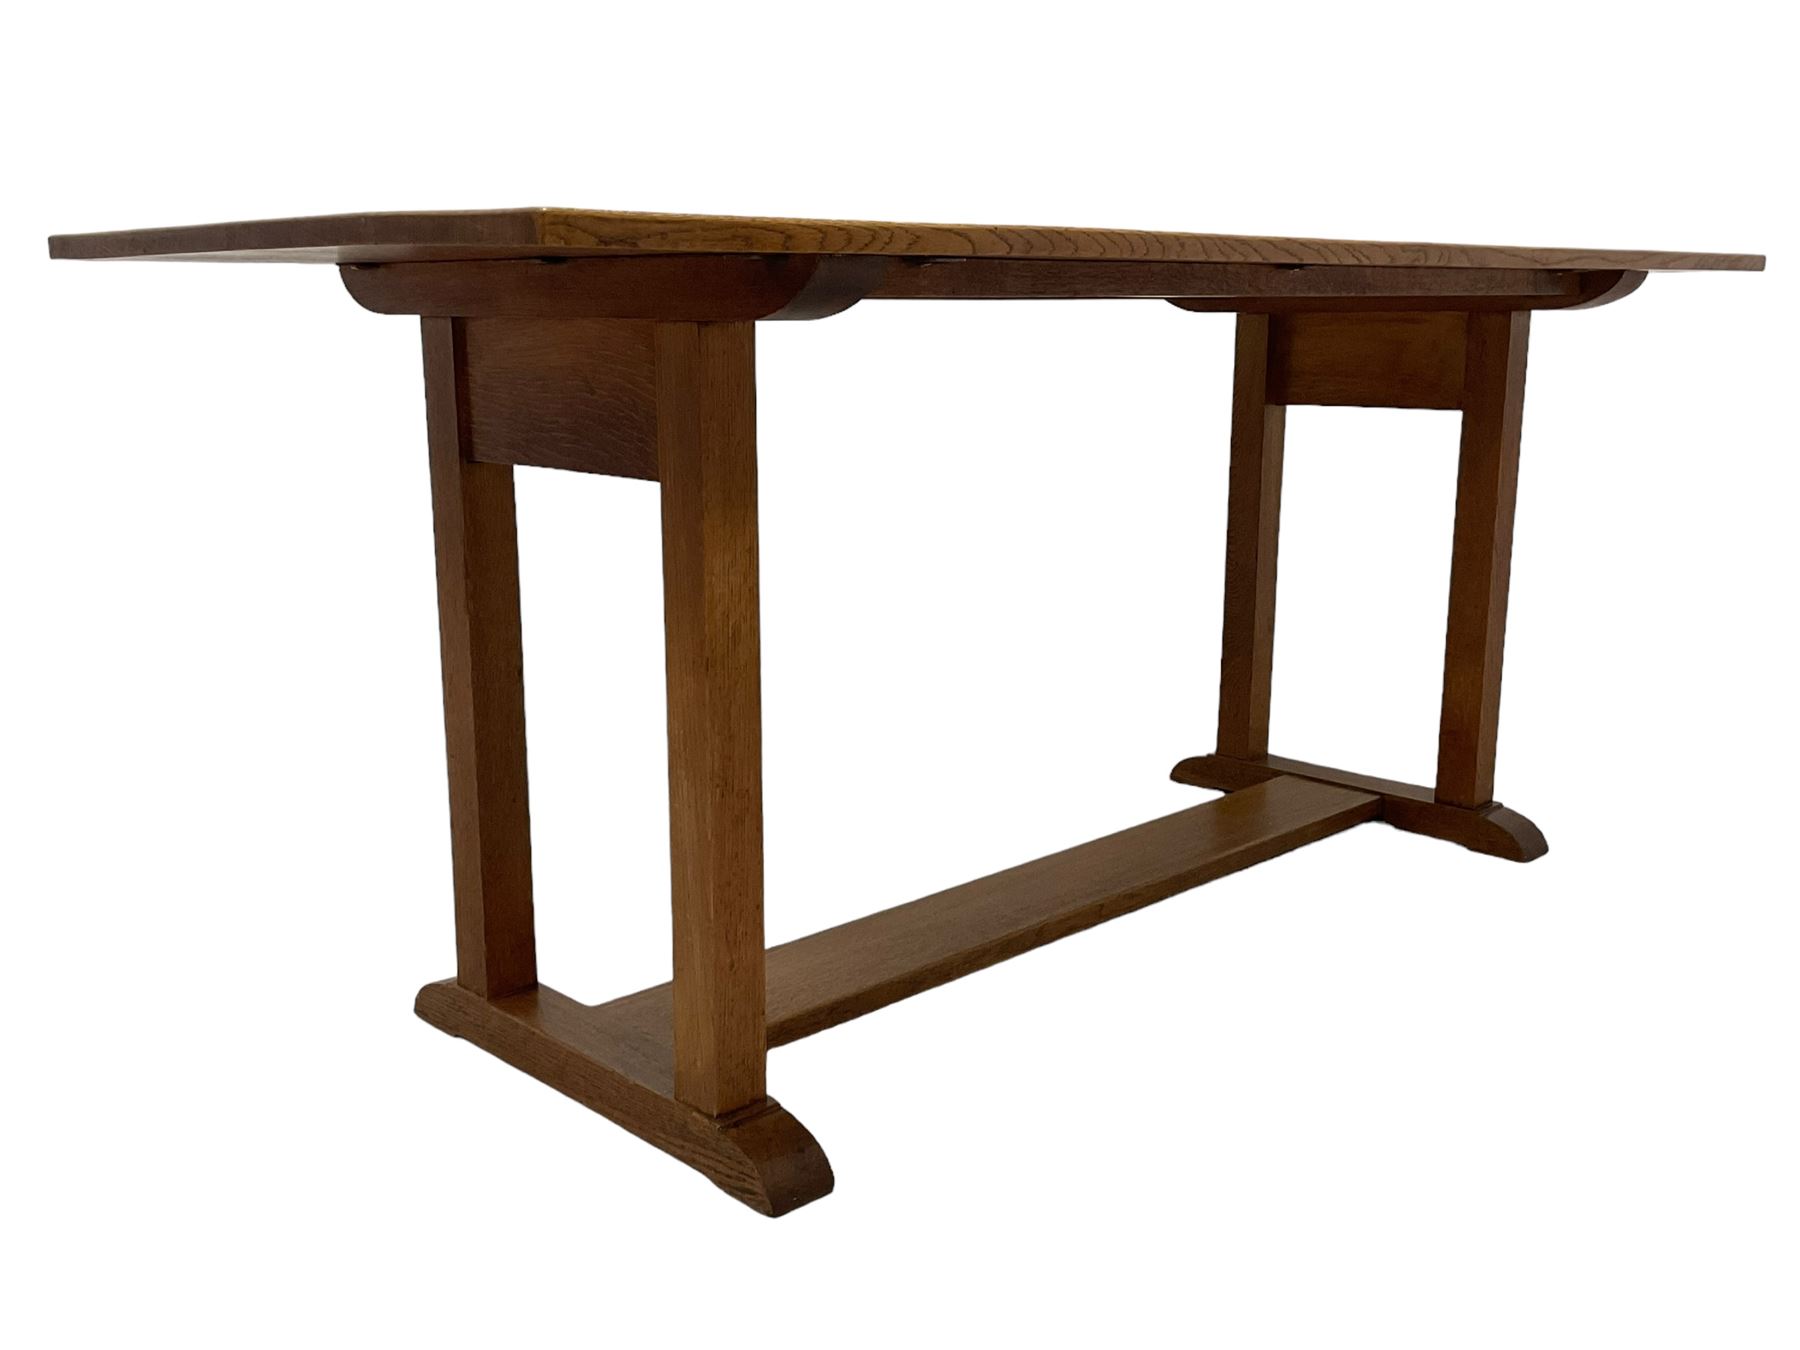 Gordon Russell - circa. 1930s oak refectory dining table - Image 9 of 9